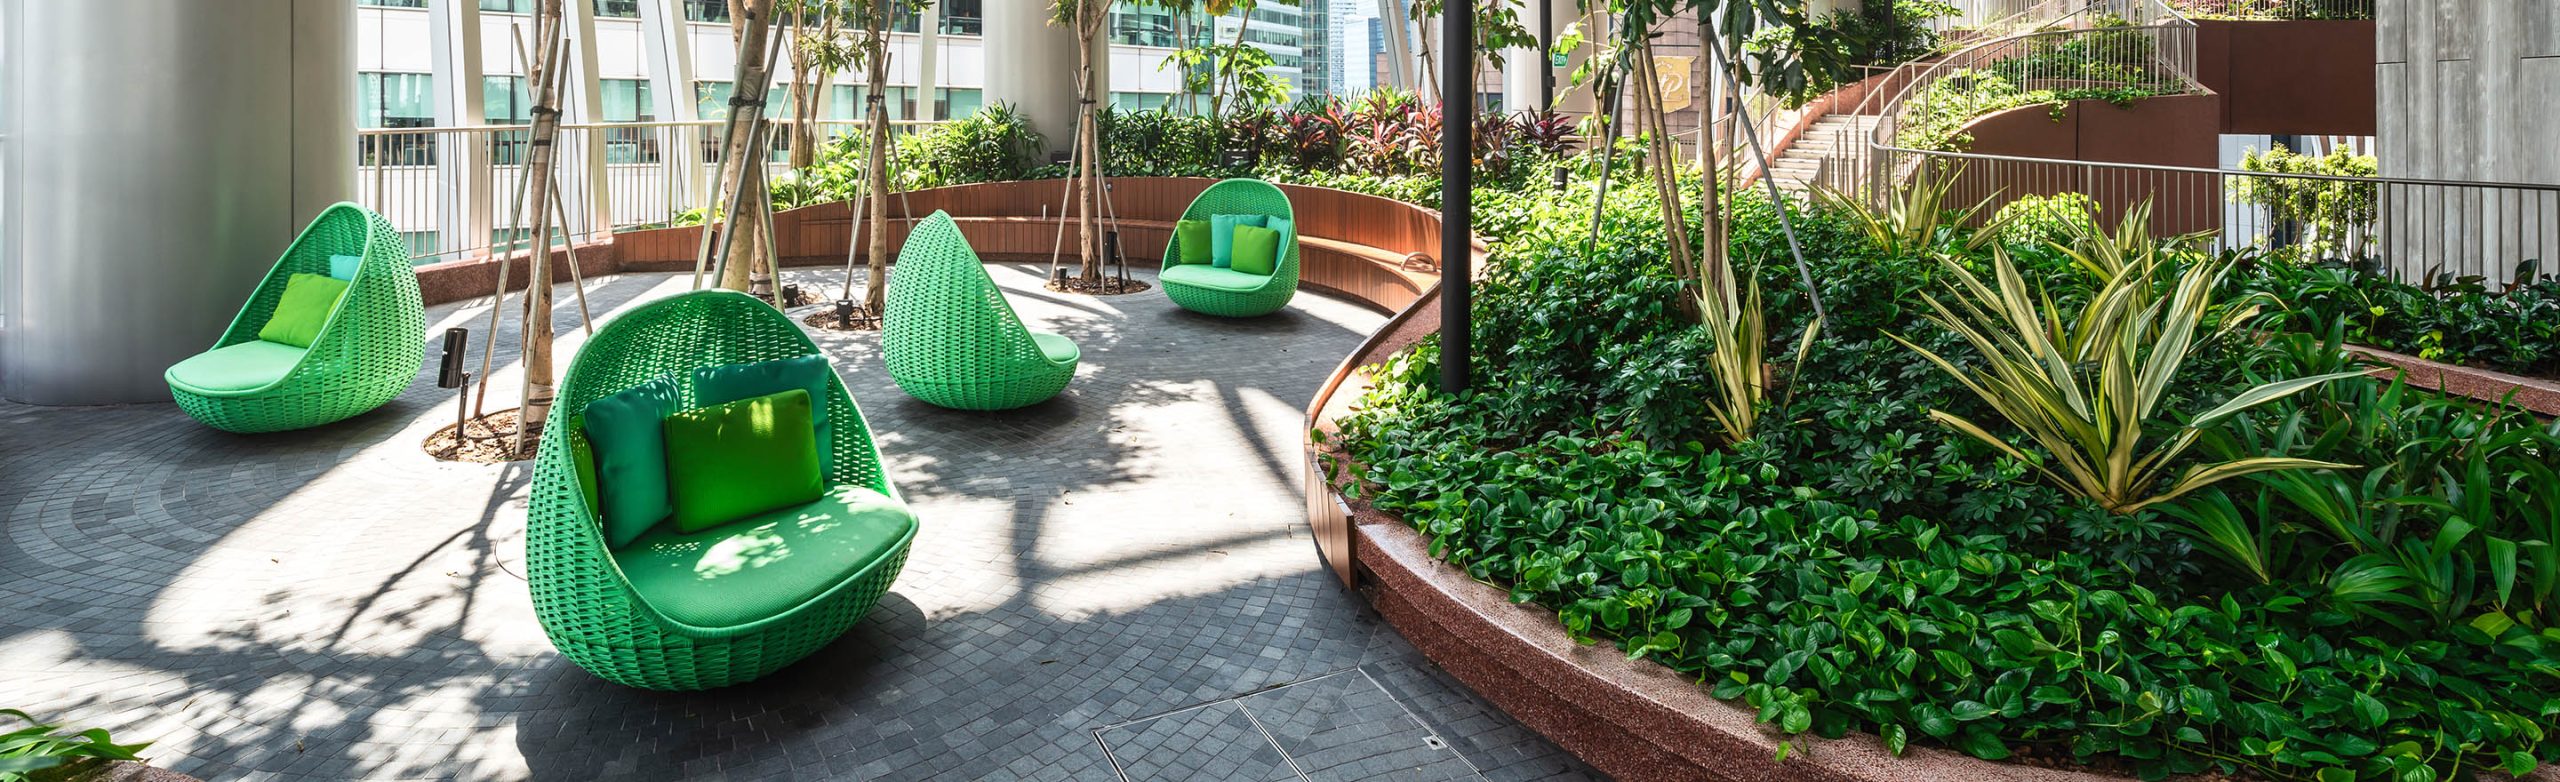 outdoor | xtra contract | xtra projects | Paola Lenti | lounge chair | interior design